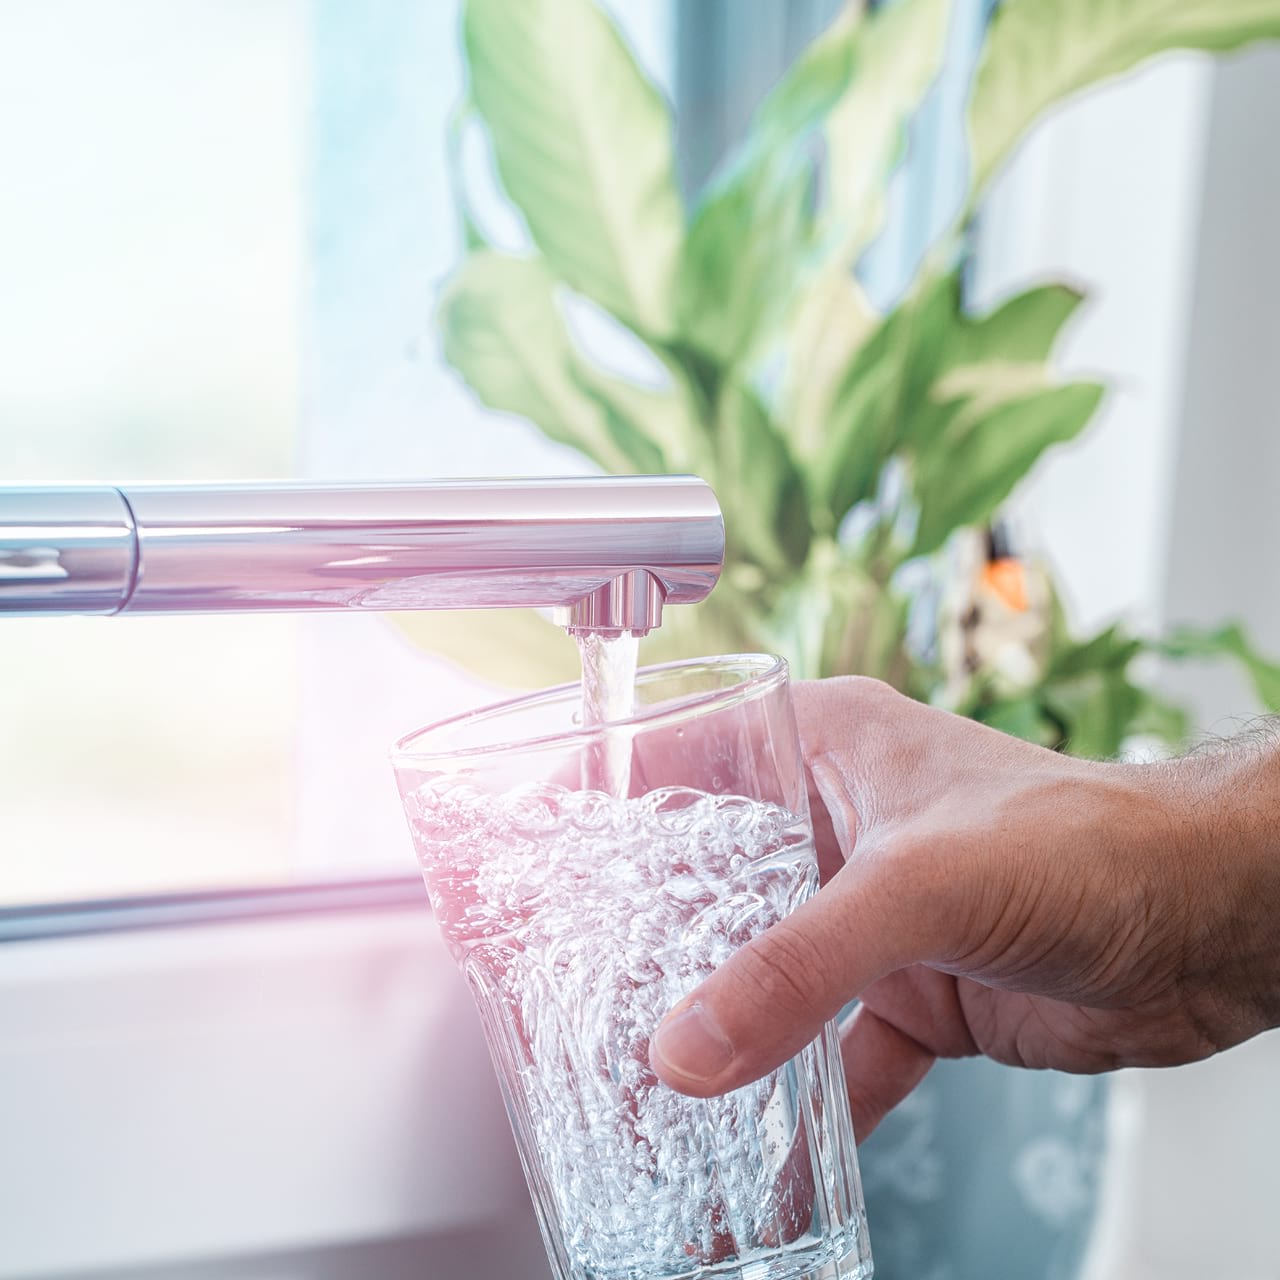 Improve Water Quality with Water Filters